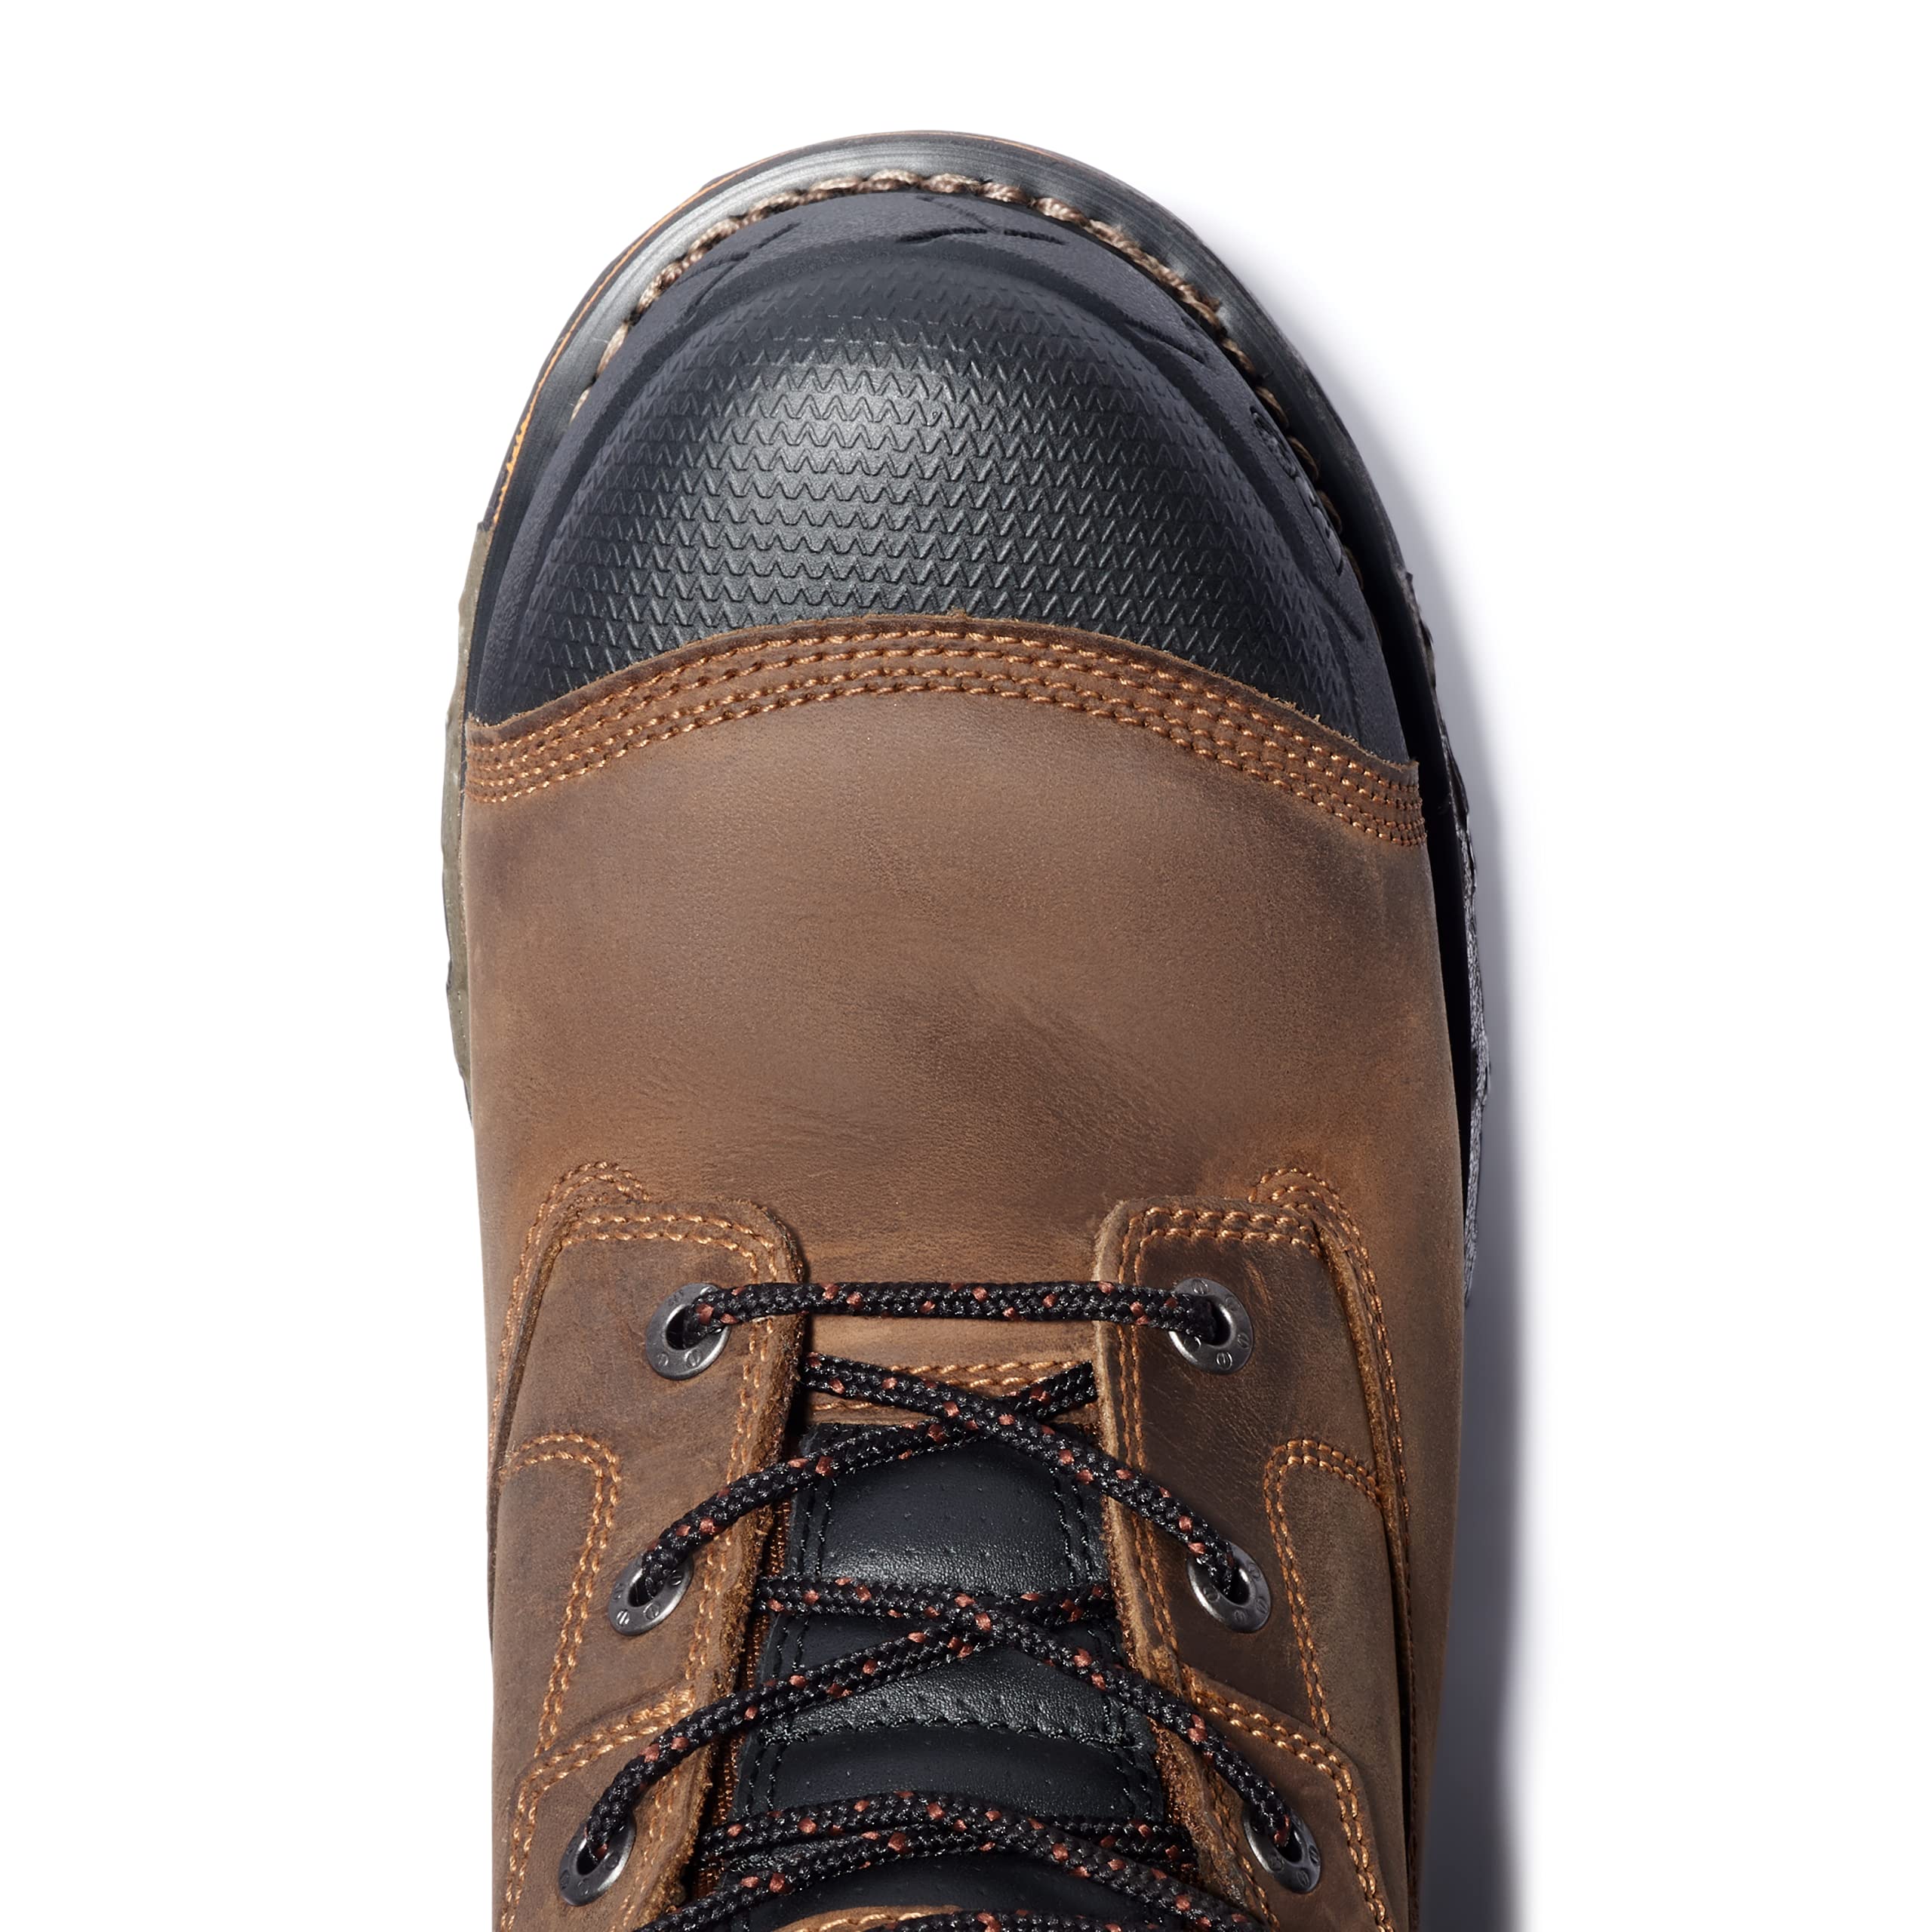 Timberland PRO Men's Boondock 6 Inch Composite Safety Toe Waterproof 6 CT WP, Brown, 9.5 Wide